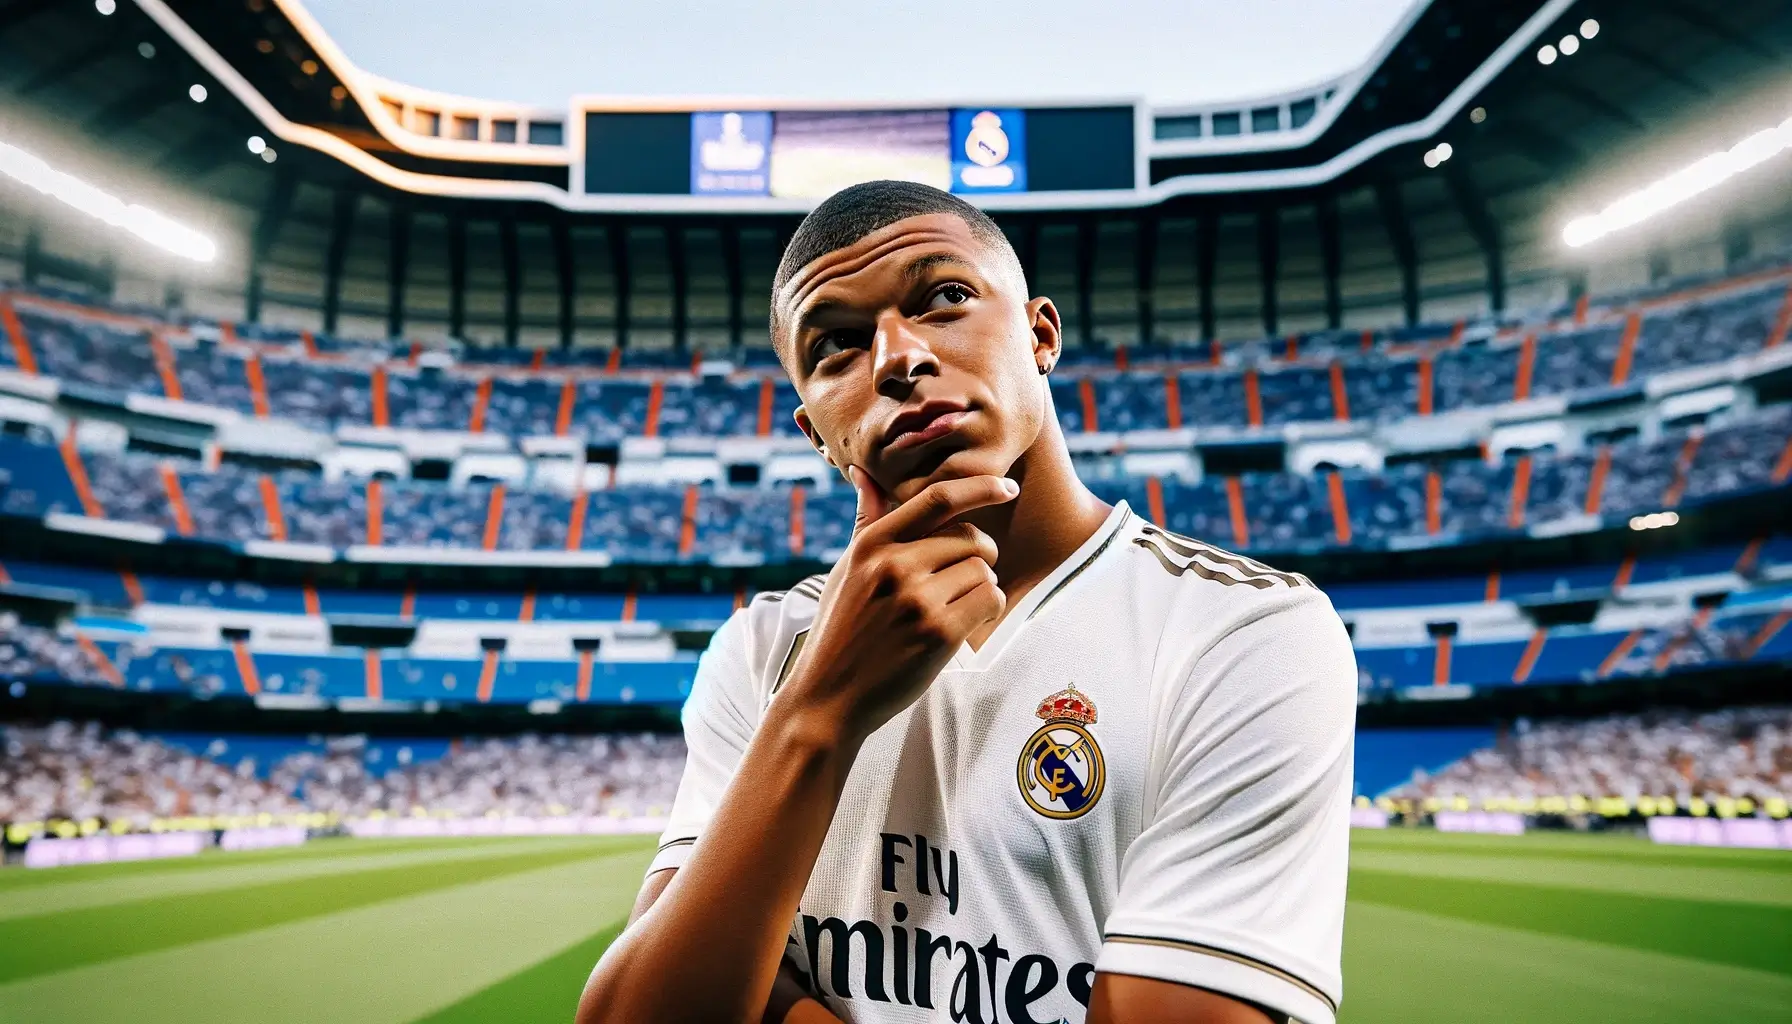 Kylian Mbappe's move to Real Madrid is set to shake up the soccer world. The French superstar is expected to bring his electrifying pace, clinical finishing, and creative flair to the Spanish club, helping them challenge for top honors.